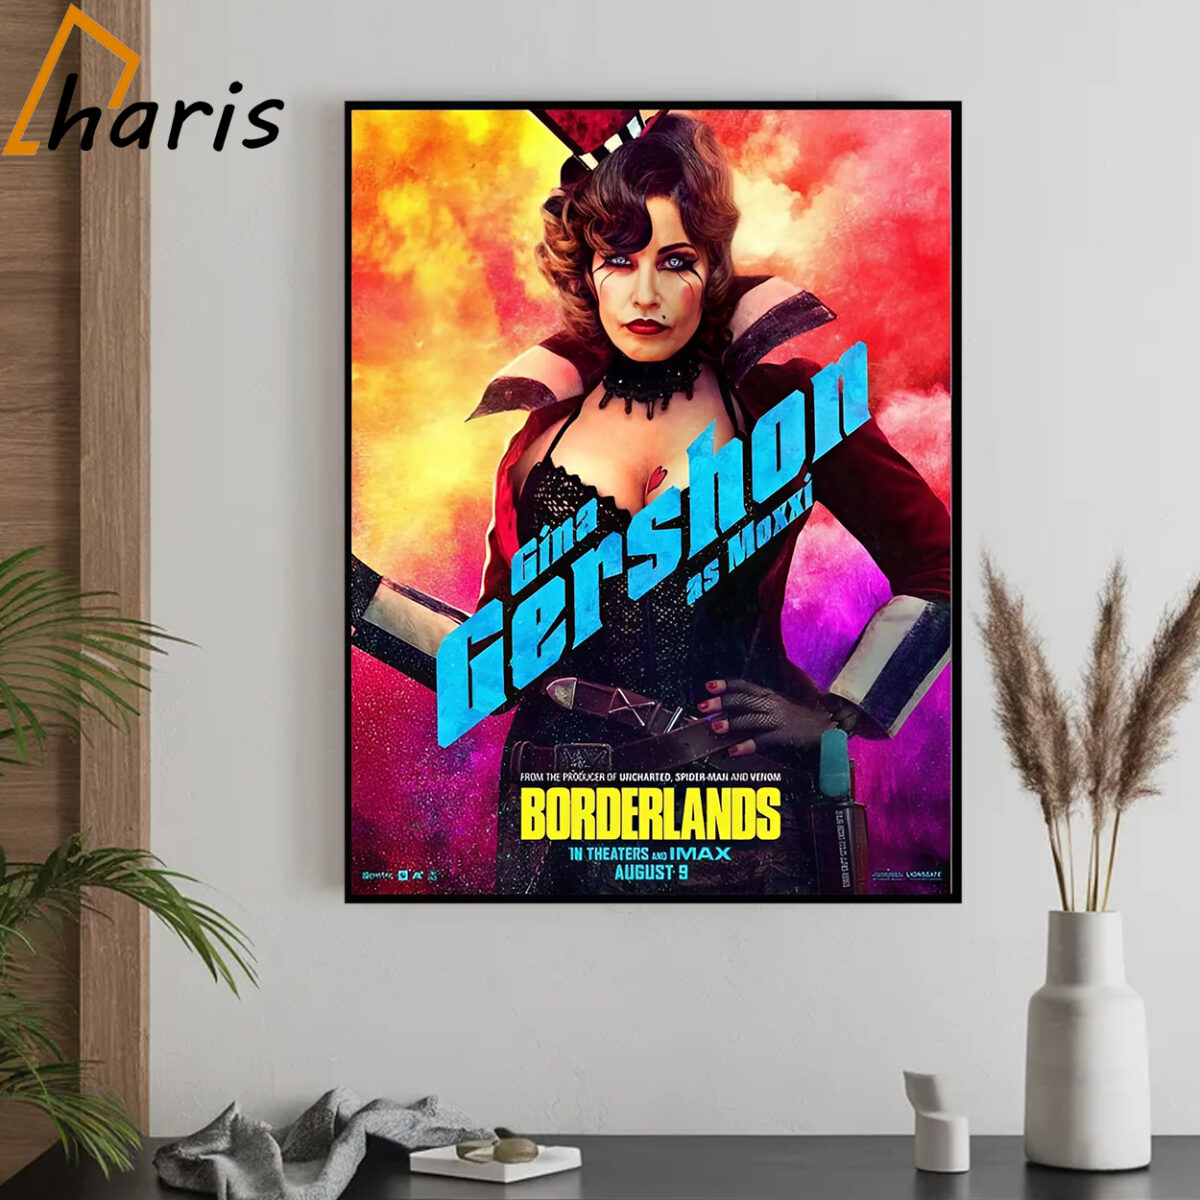 Moxxi Posters For Borderlands Releasing In Theaters And IMAX On August 9 Poster